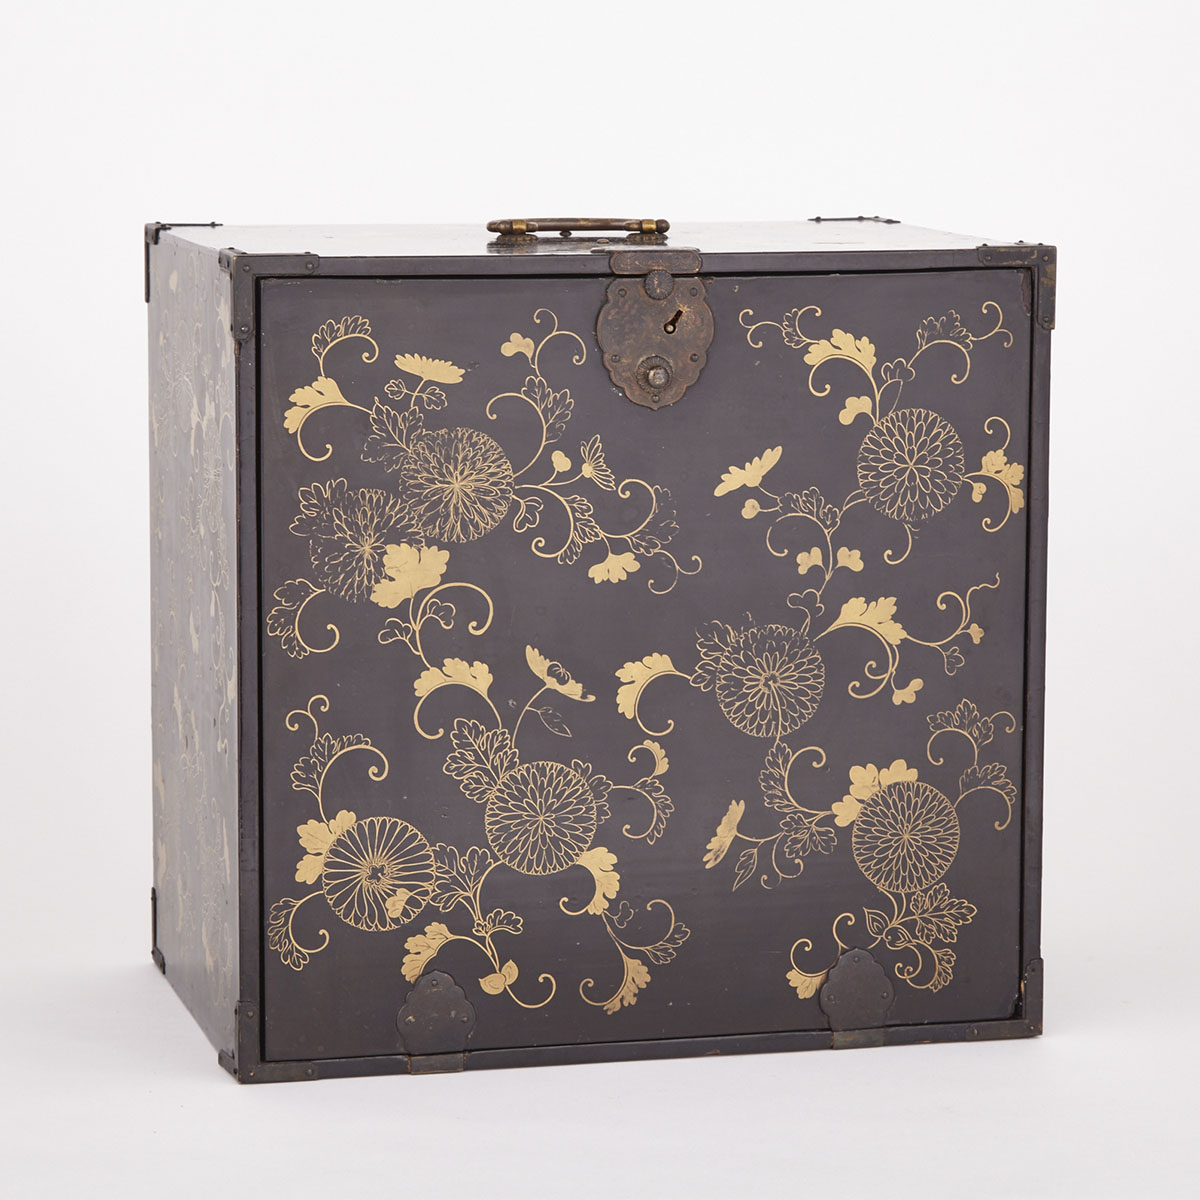 Japanese Gilt Decorated Black Lacquer Jewellery Chest, early-mid 20th century